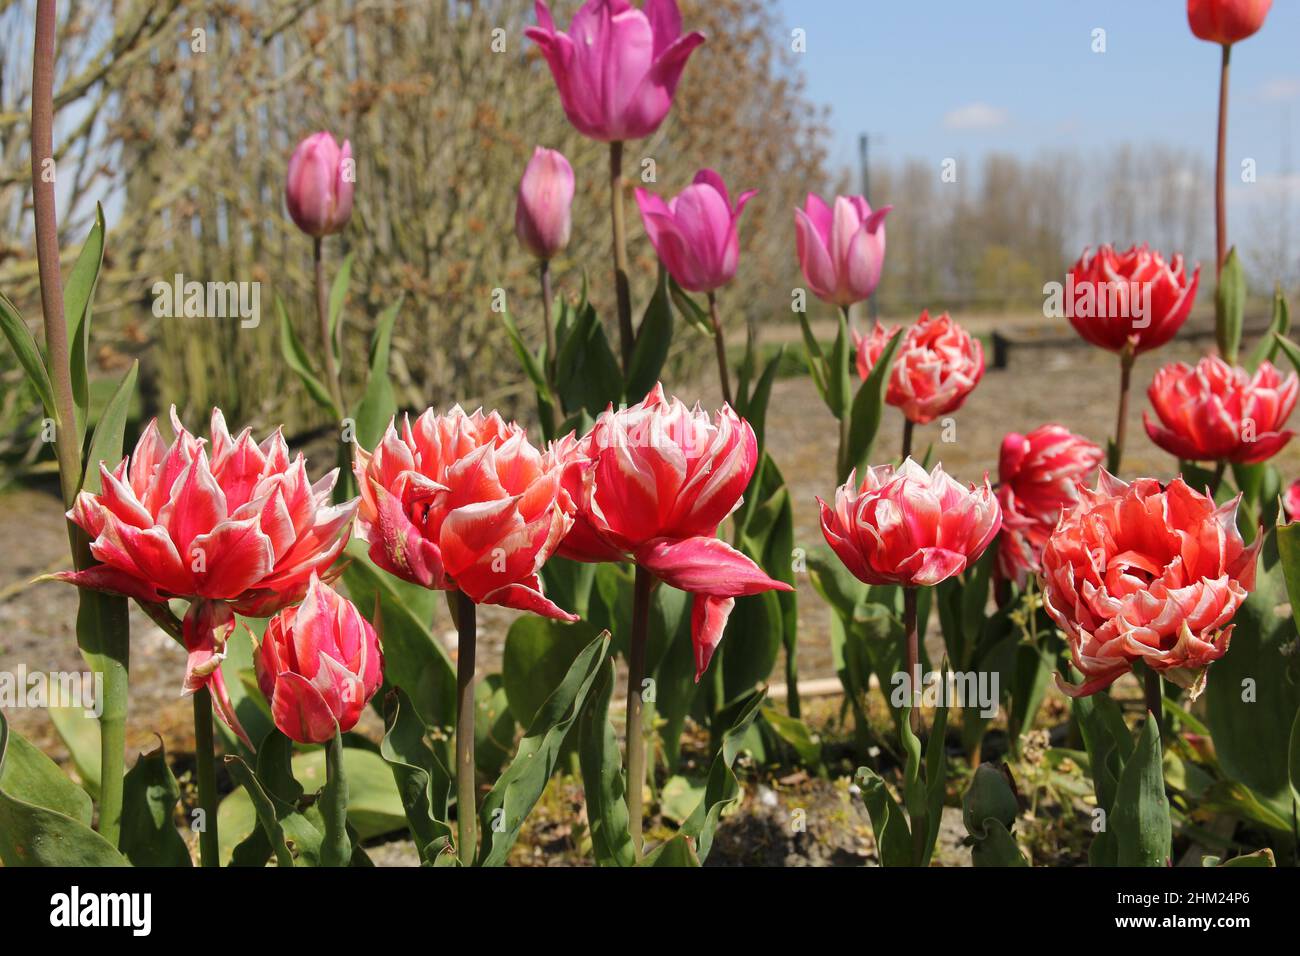 a row red double peony tulips with white edges at the leaves in the flower garden in the netherlands in springtime Stock Photo